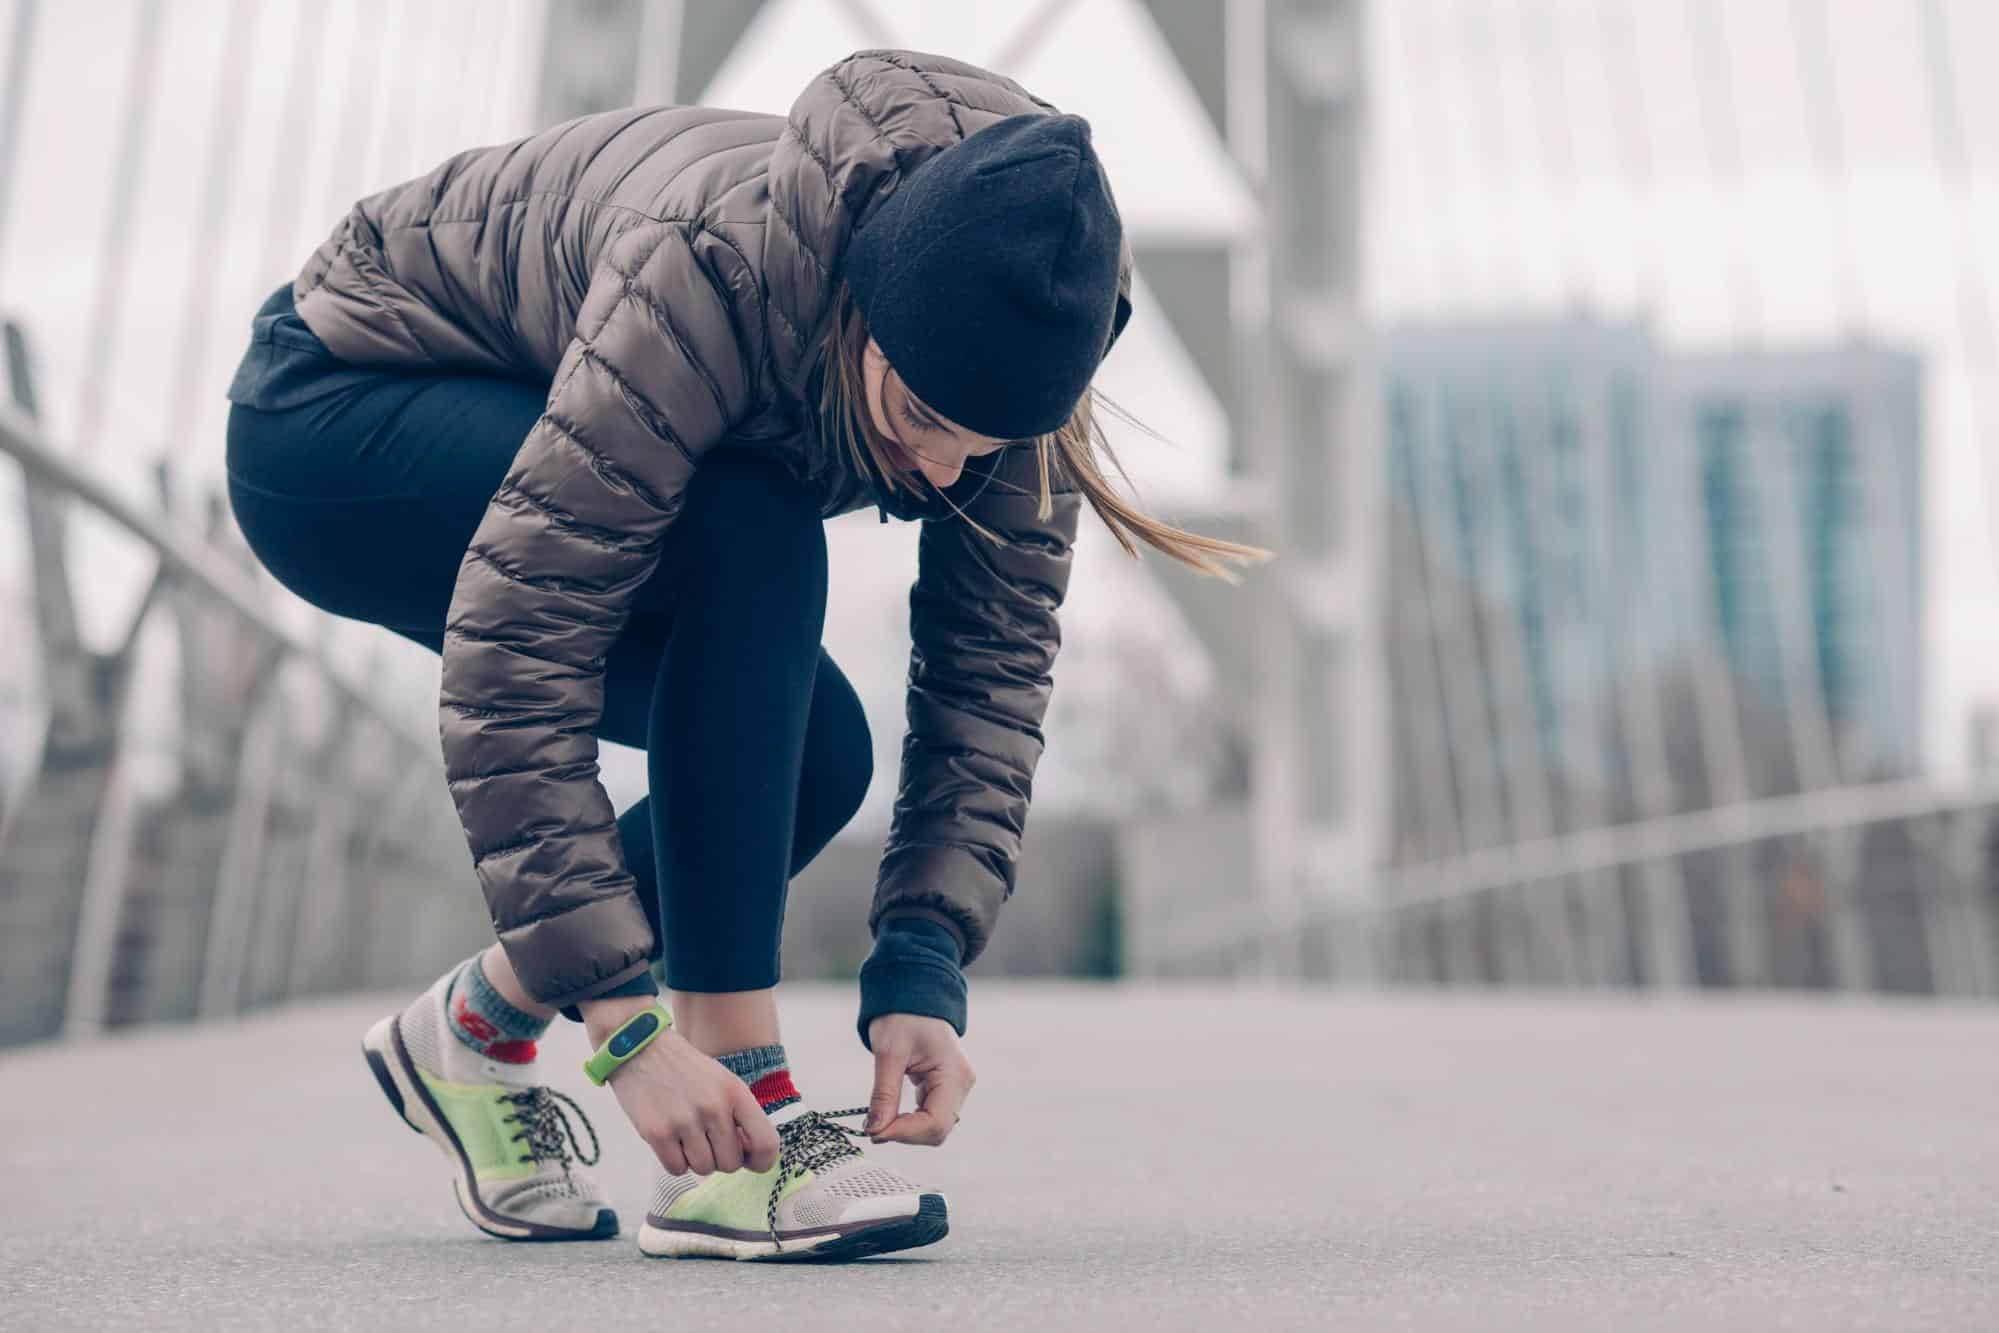 joint pain in cold weather, a woman jogger wearing winter athletic attire bends down to tie the sneaker on her right foot.